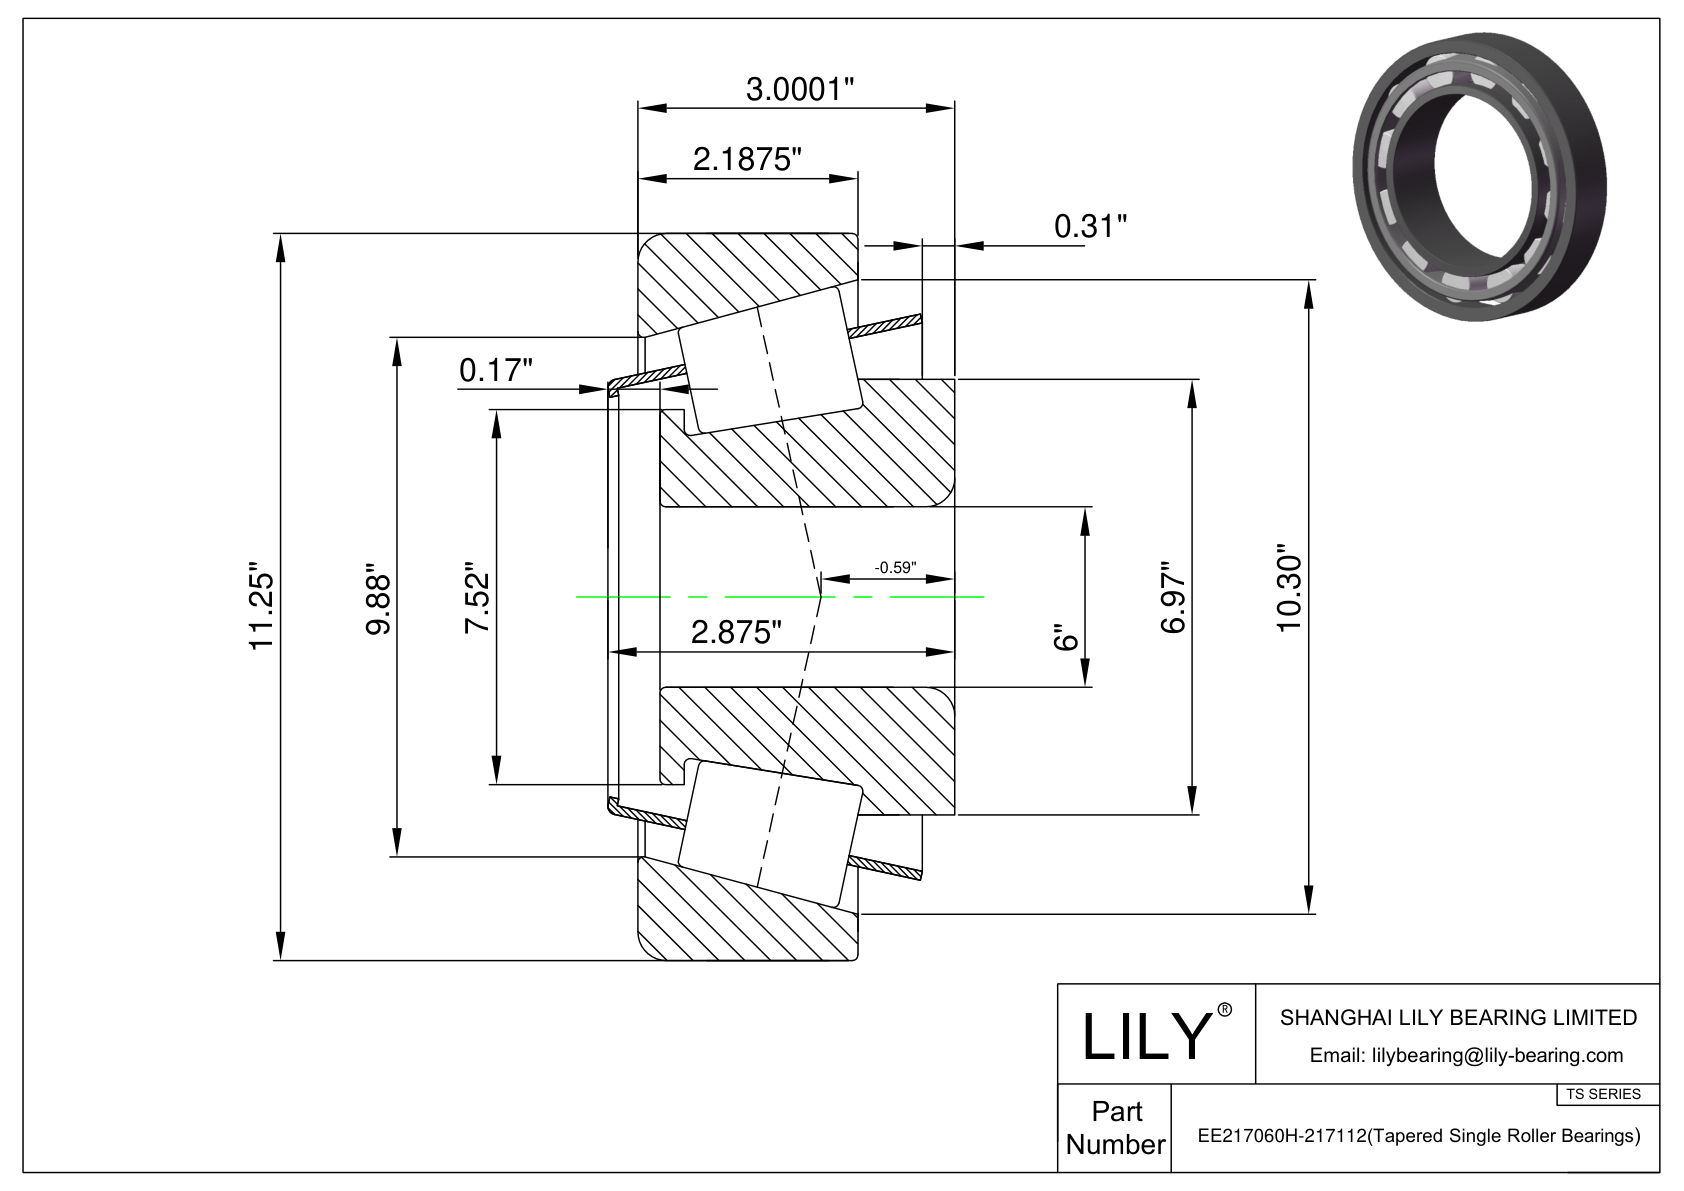 EE217060H-217112 TS (Tapered Single Roller Bearings) (Imperial) cad drawing